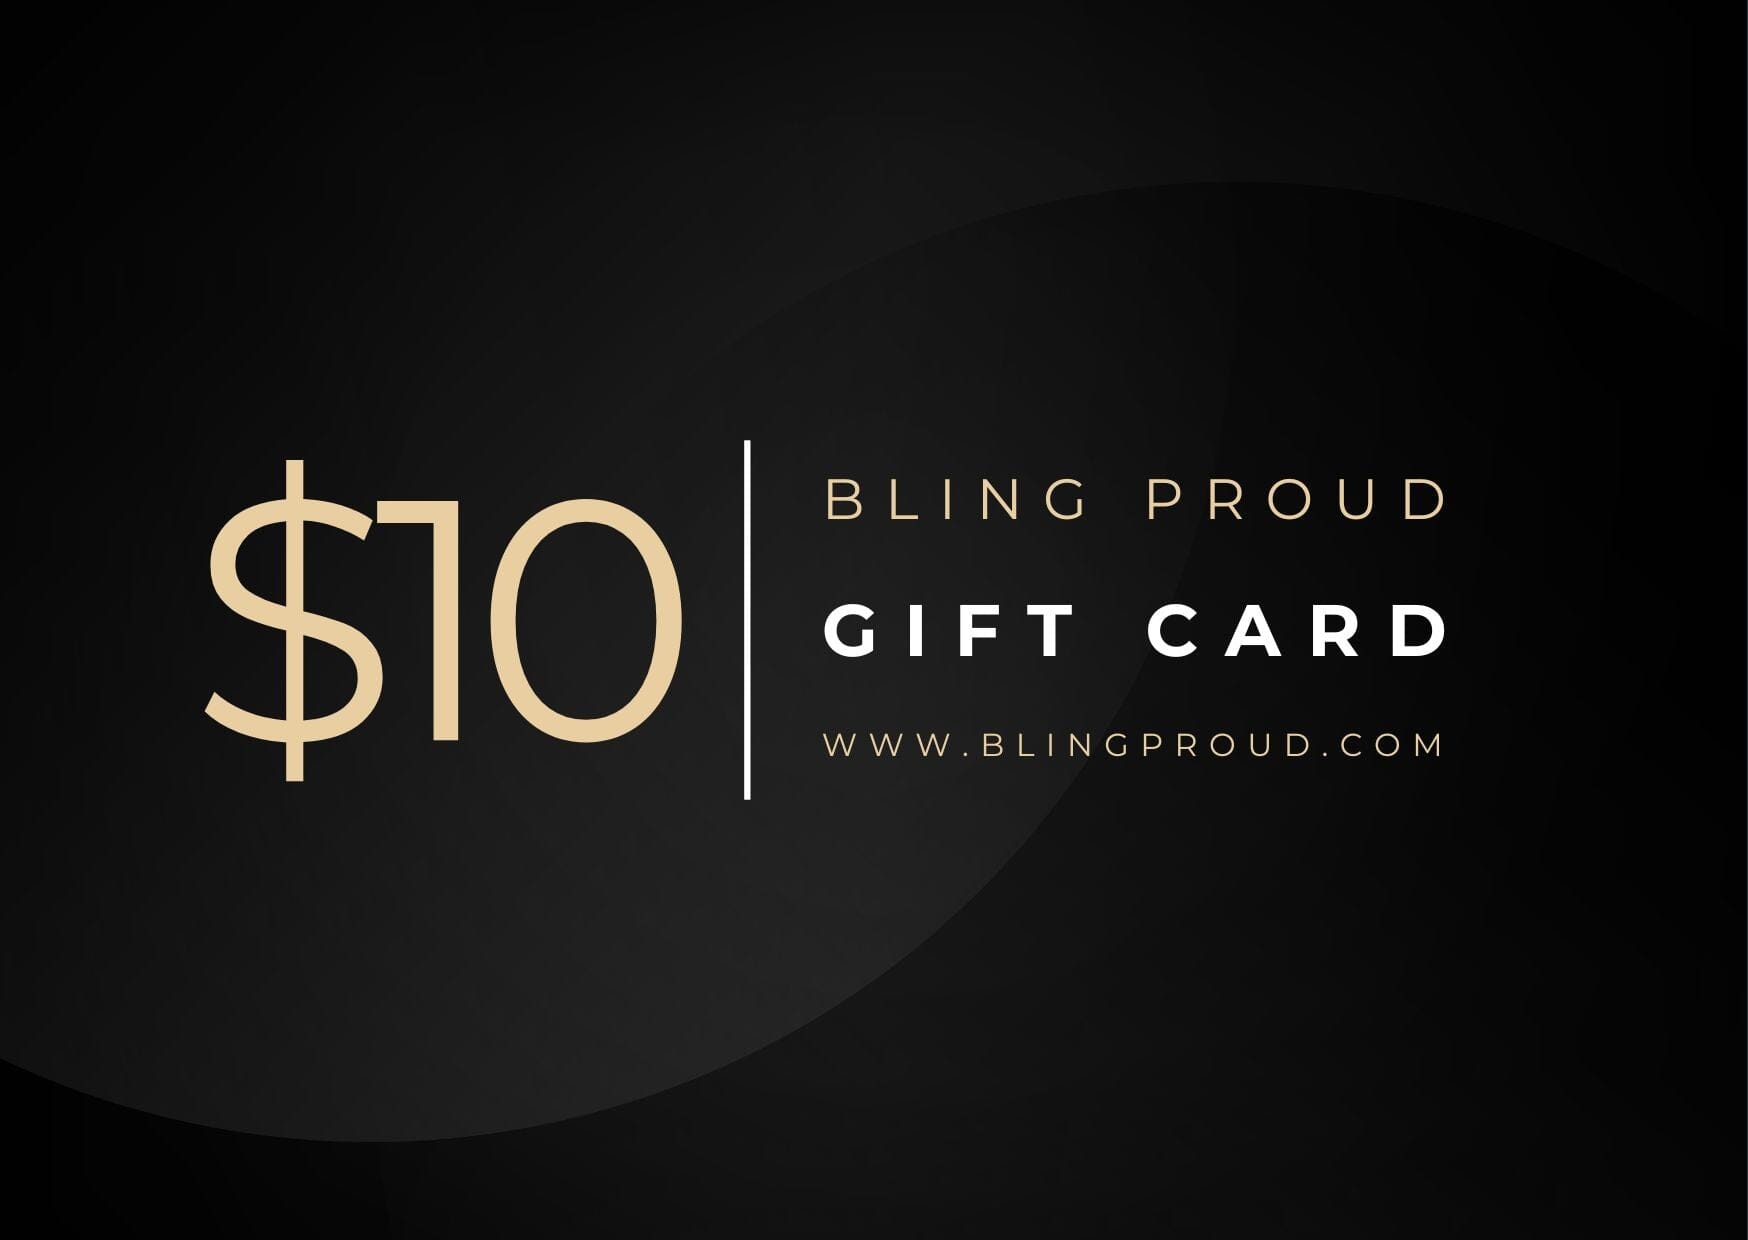 Bling Proud Gift Card $10.00 